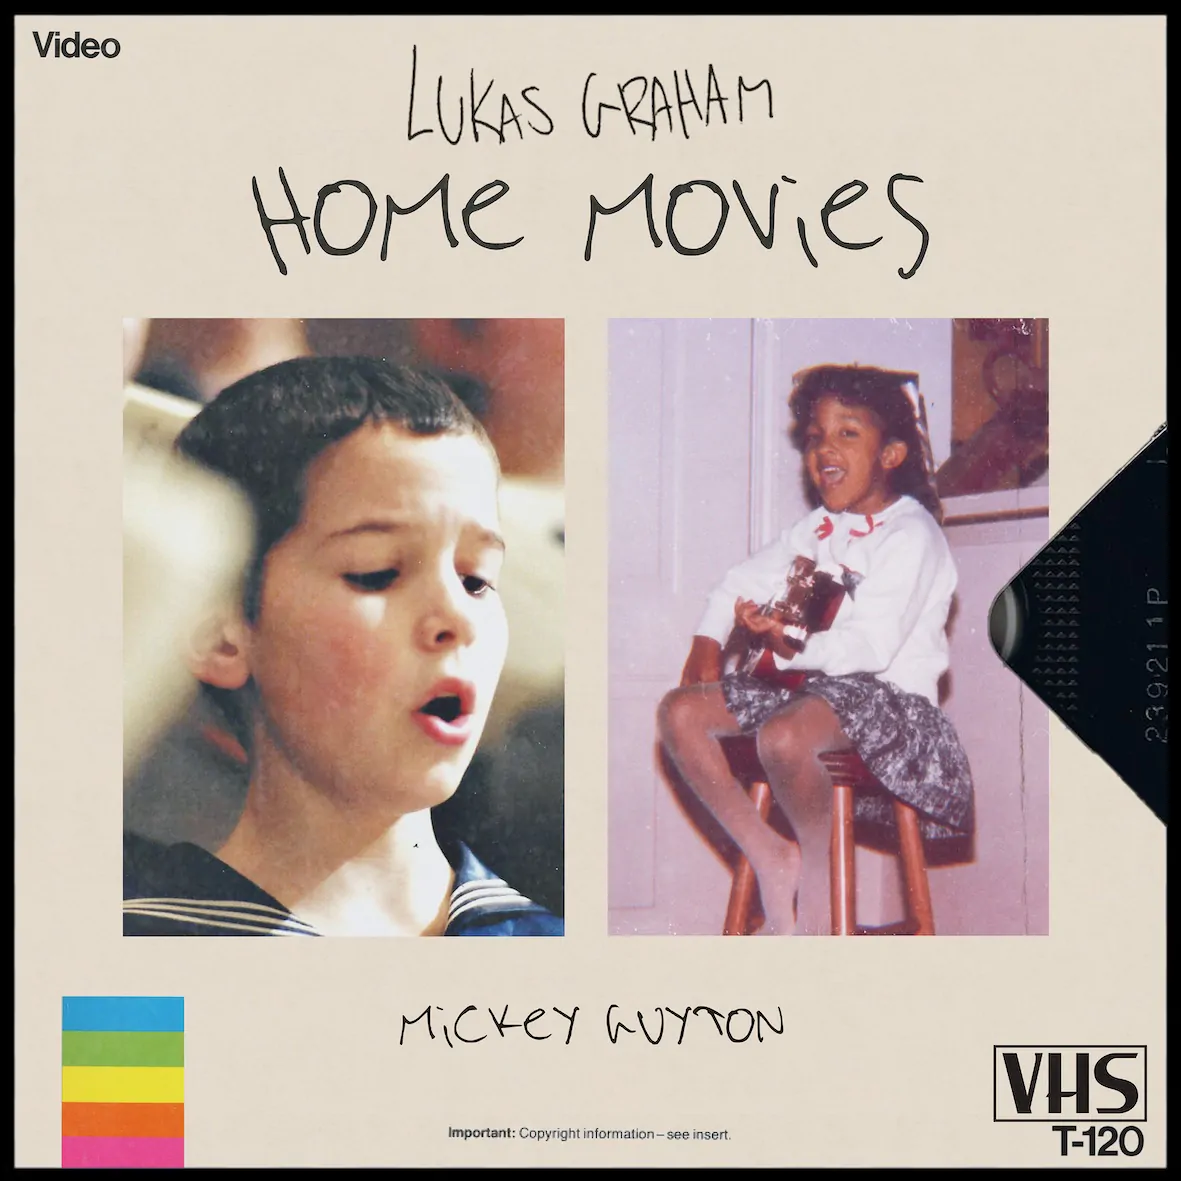 LUKAS GRAHAM teams up with MICKEY GUYTON for new reflective ballad ‘Home Movies’